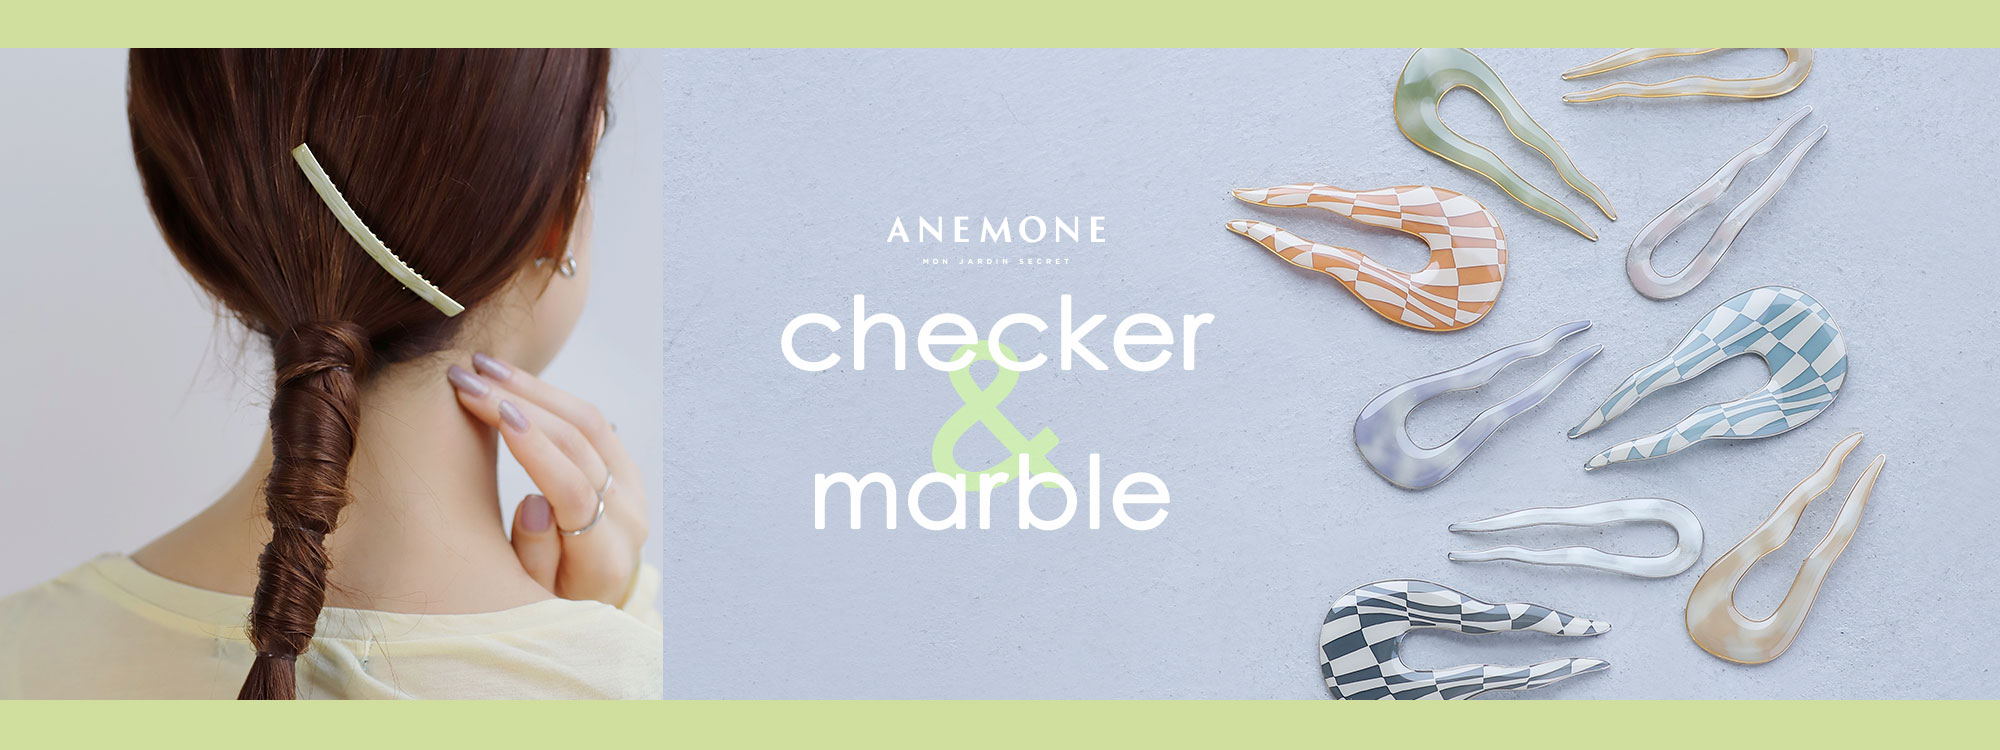 ANEMONE 22SS checker&marble